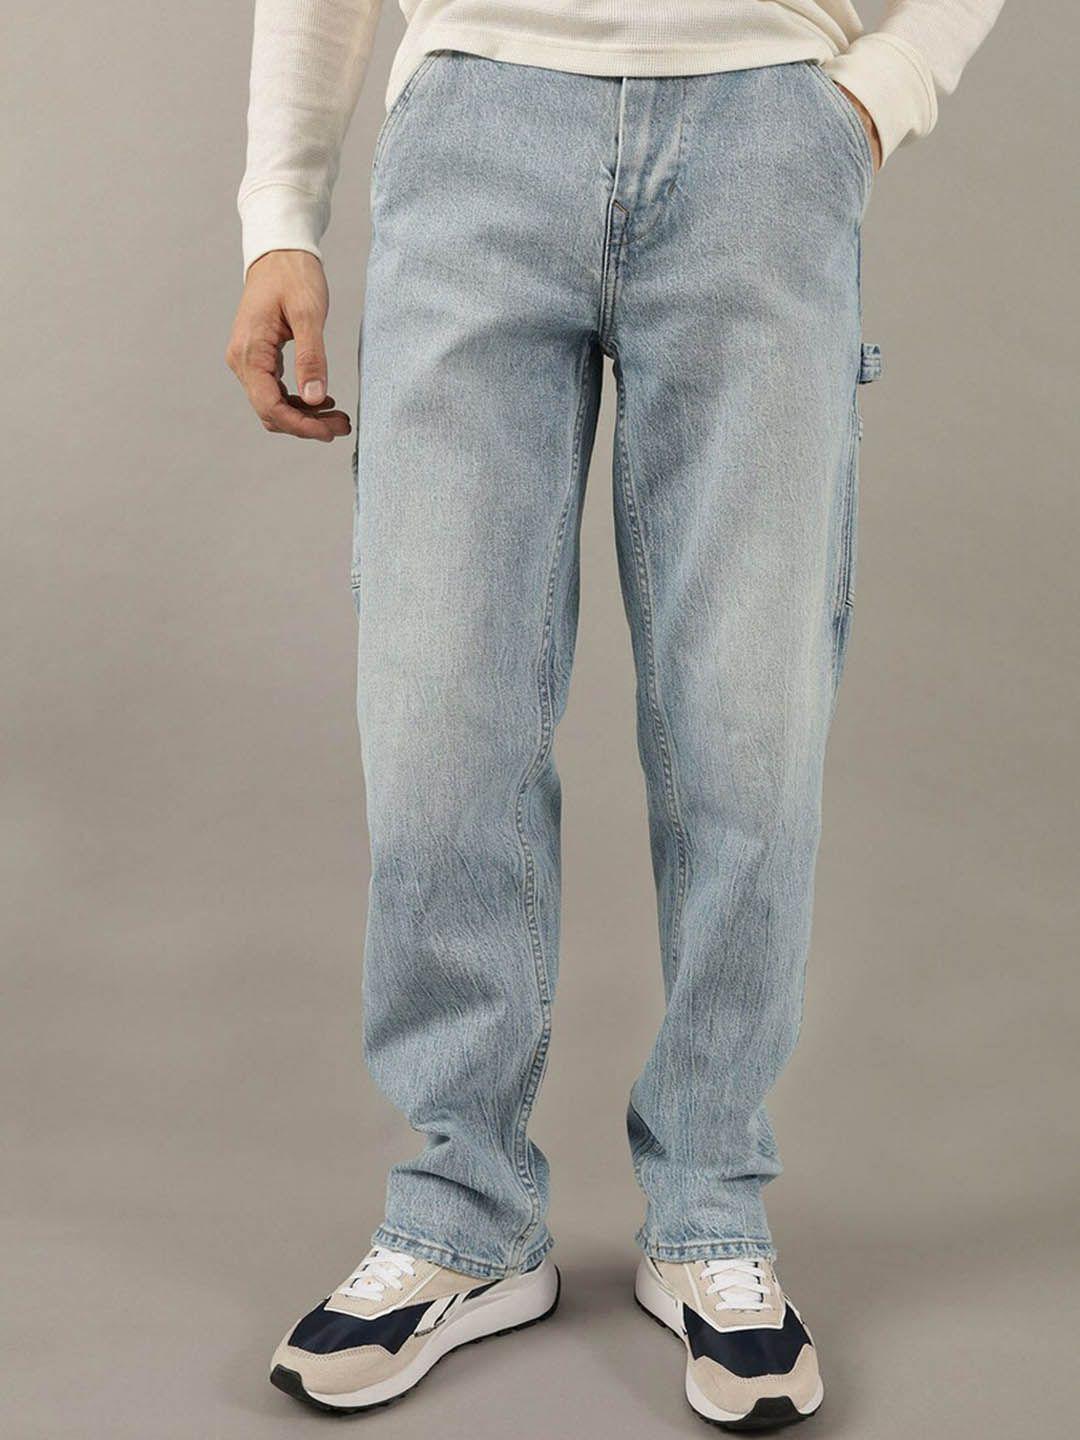 american-eagle-outfitters-men-mid-rise-clean-look-heavy-fade-cotton-jeans